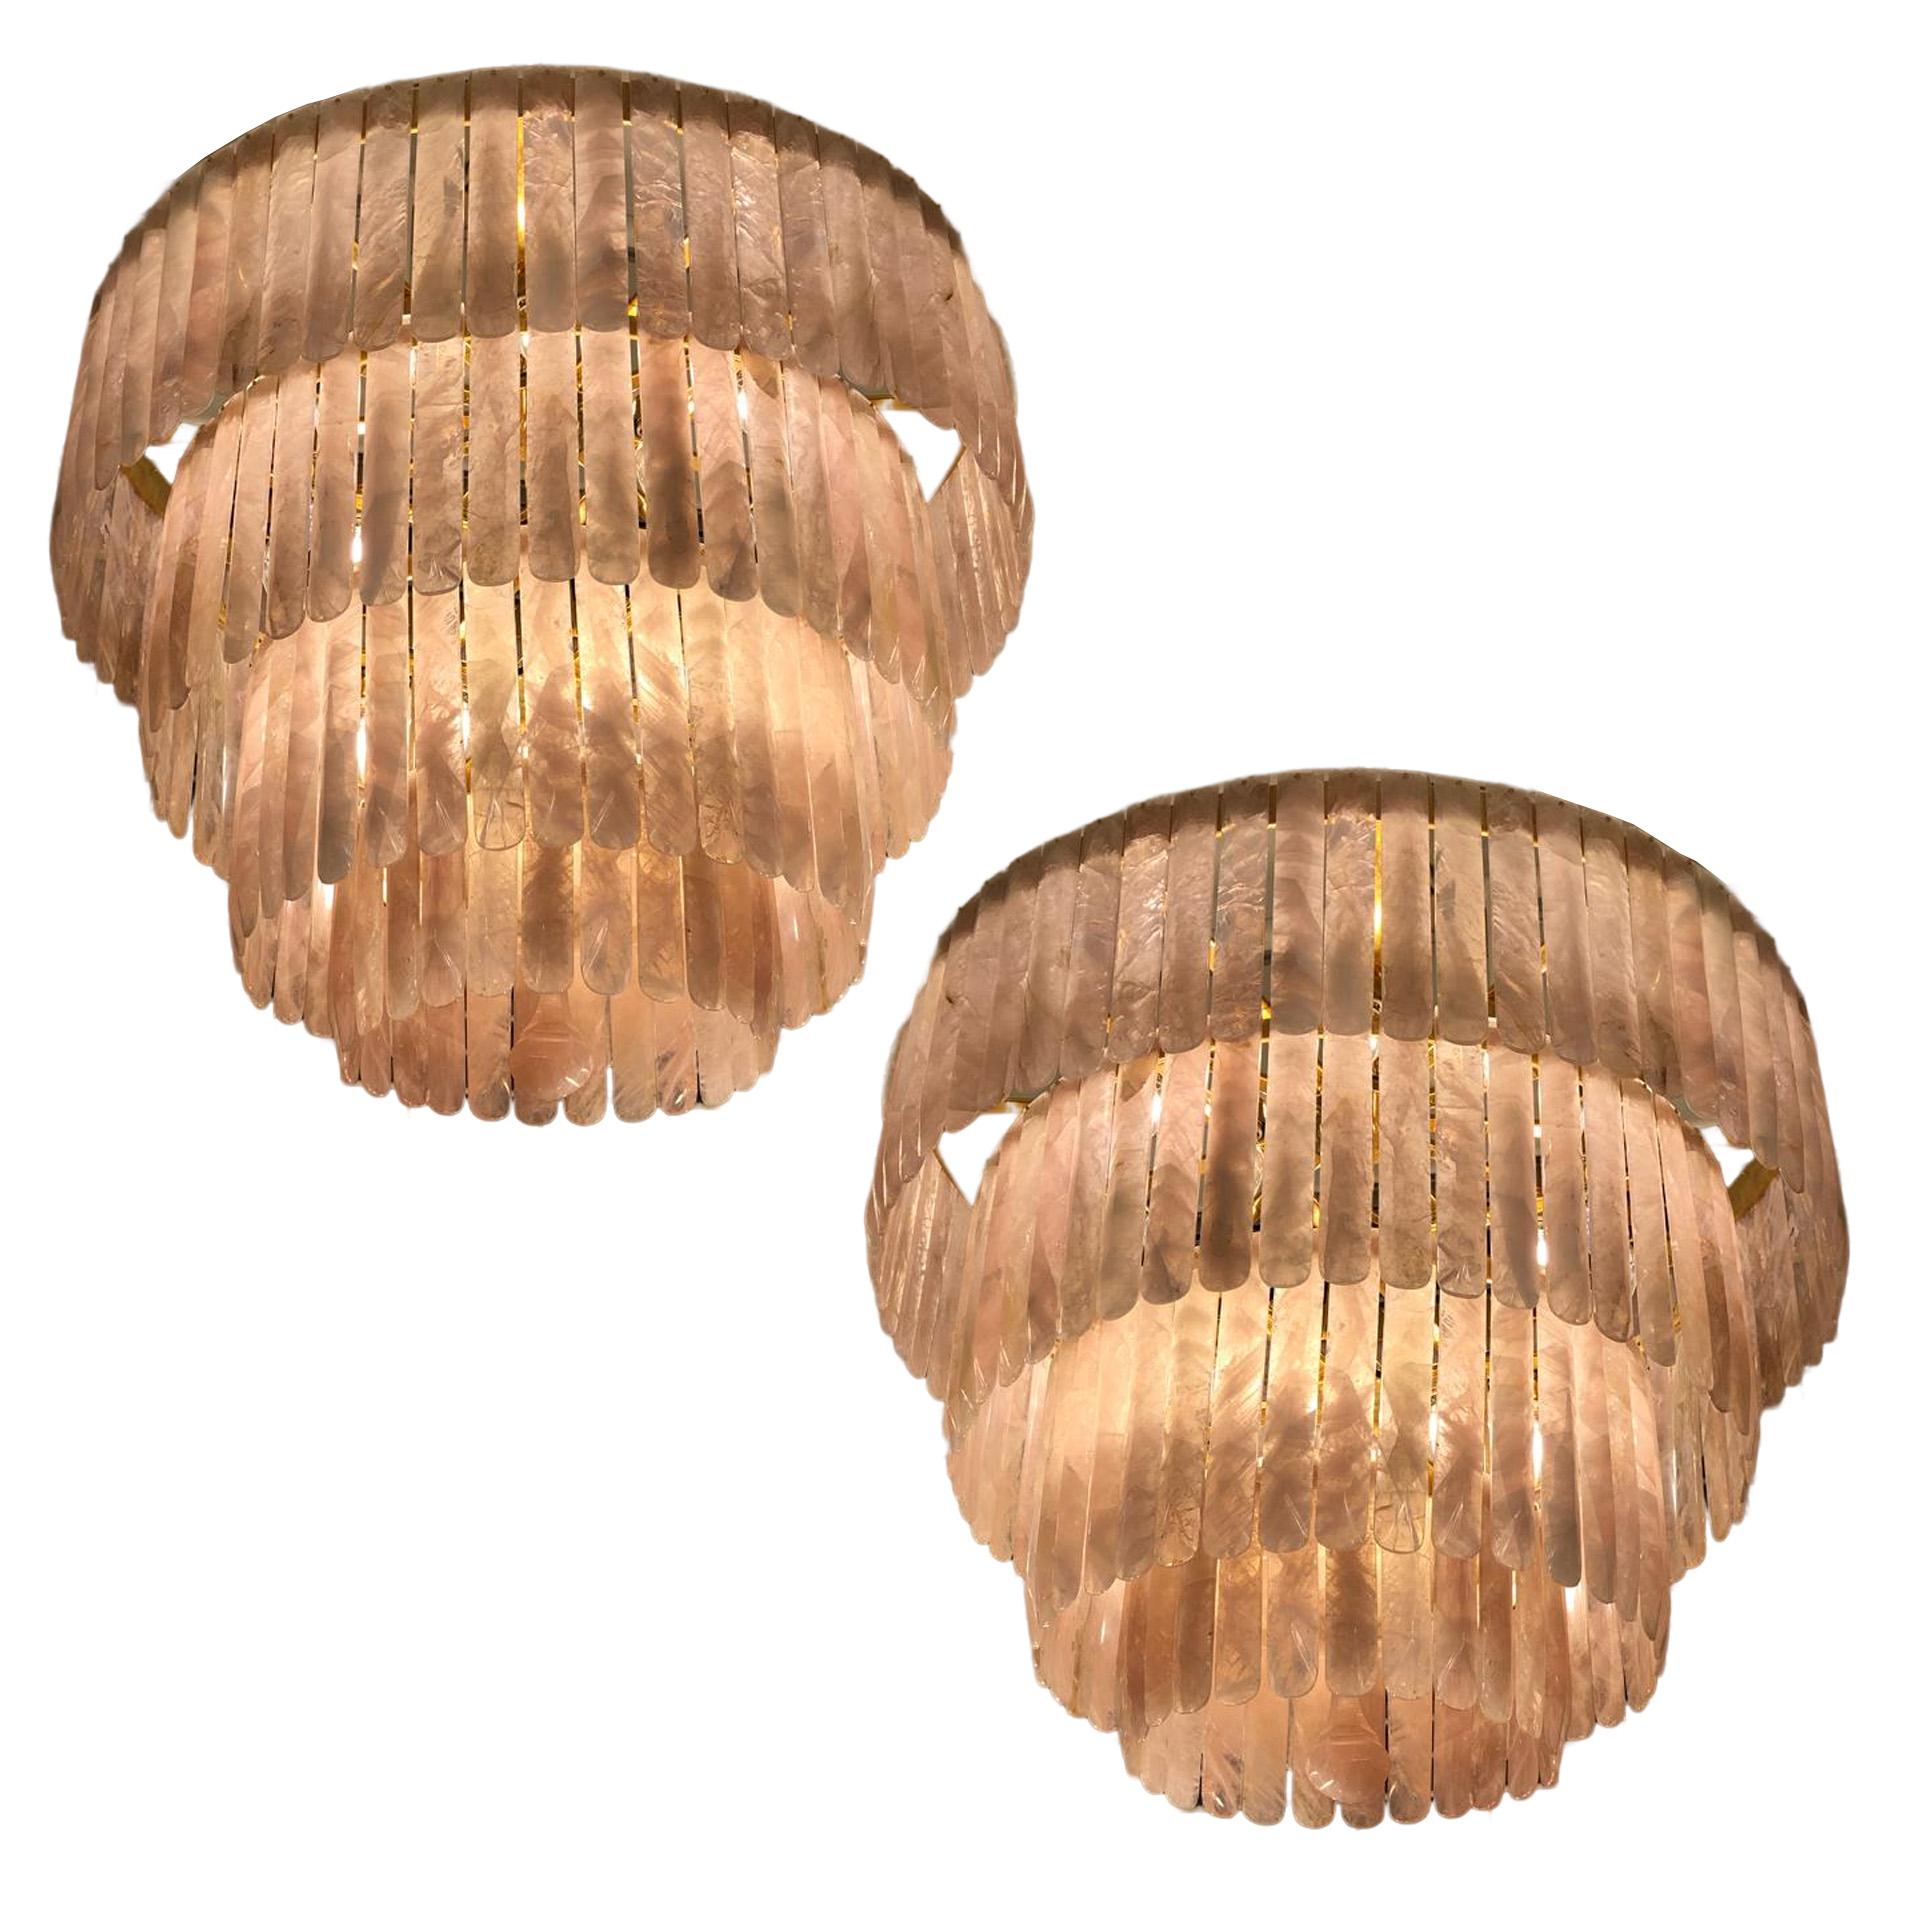 A pair of beautiful rose quartz chandeliers comprising 4 cascading bronze circular tiers each profusely hung with 175 individually hand carved rose quartz crystal drops. A spectacular solid rose quartz saucer is inset in the lower bronze ring with a